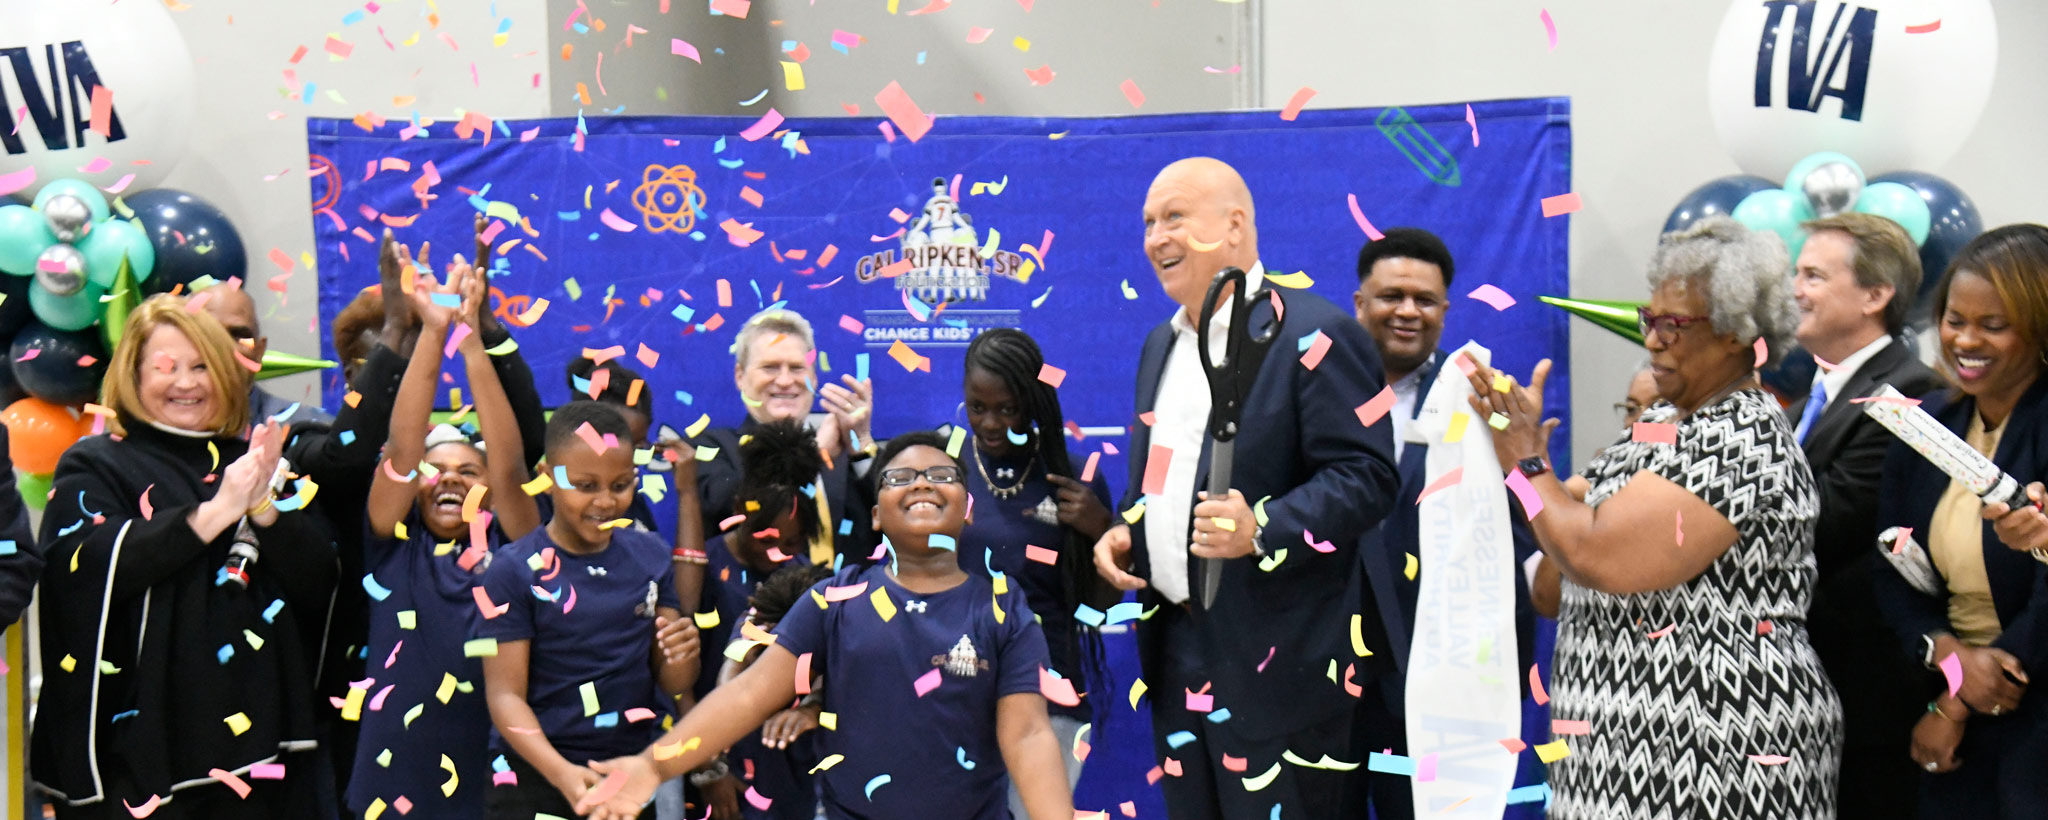 Cal Ripken Jr. and young guests celebrate the opening of a new STEM center at the Boys & Girls Club of North Mississippi – Haven Acres Unit, in southeastern Tupelo